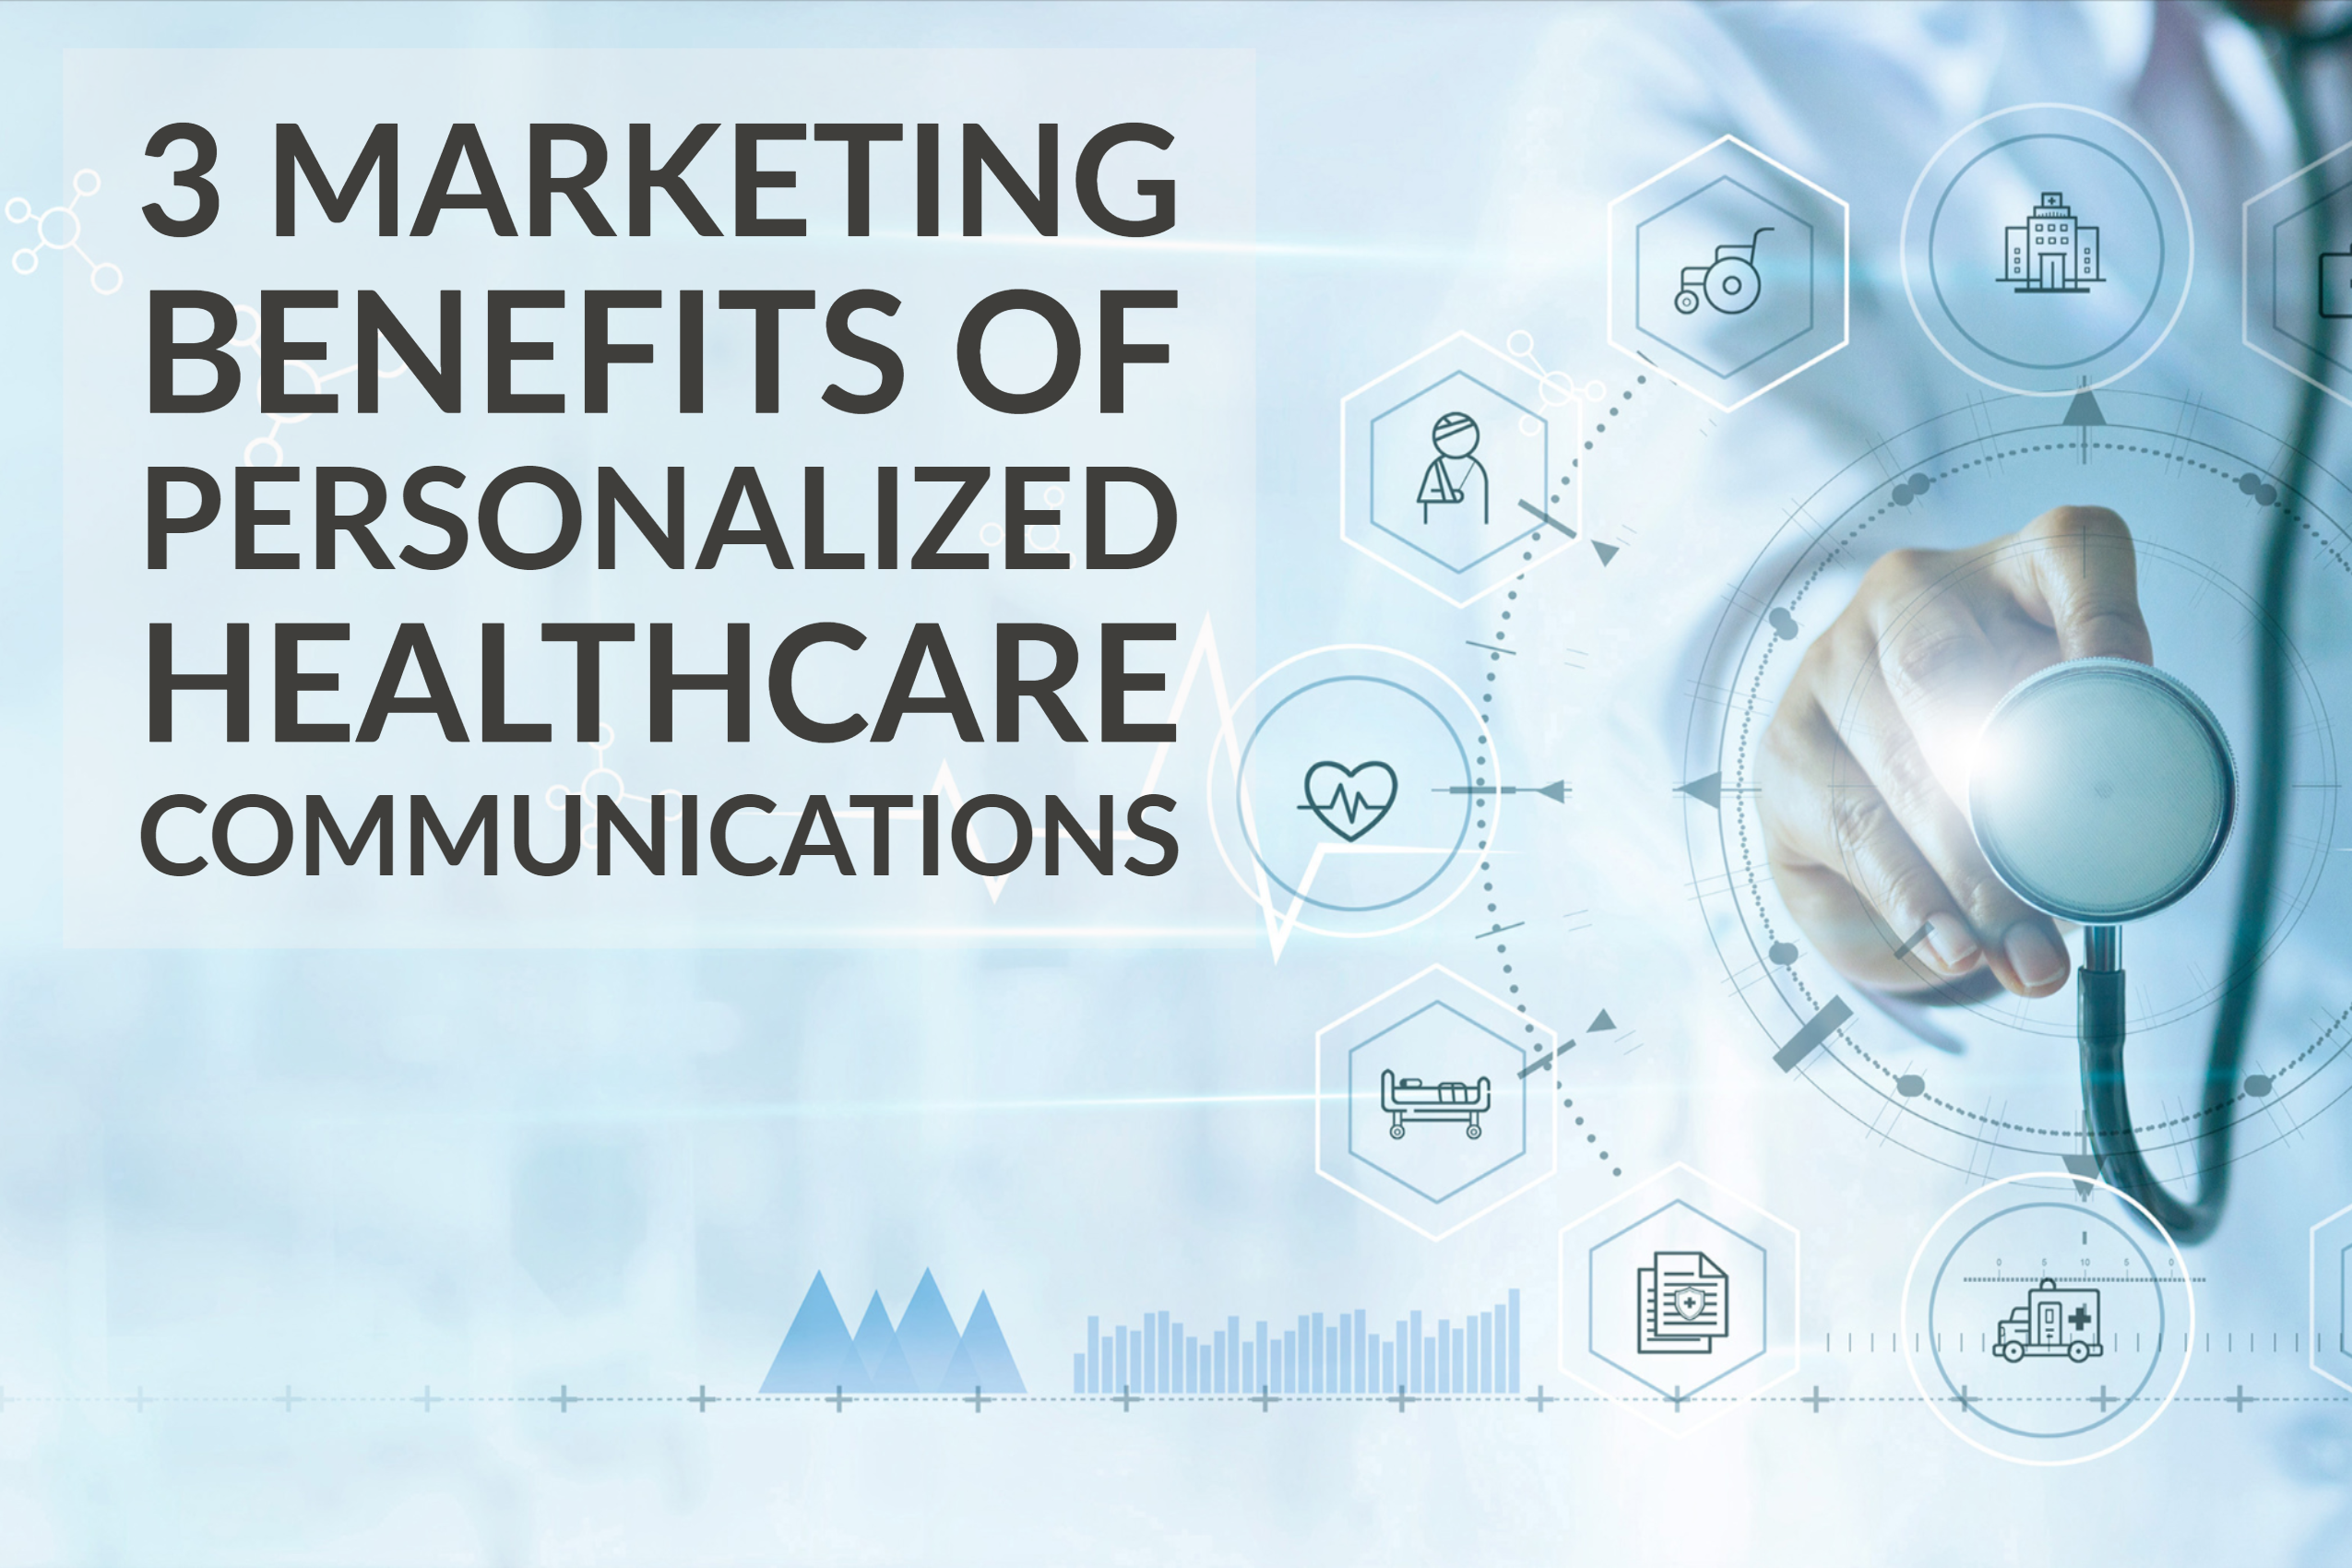 3 Marketing Benefits of Personalized Healthcare Communications